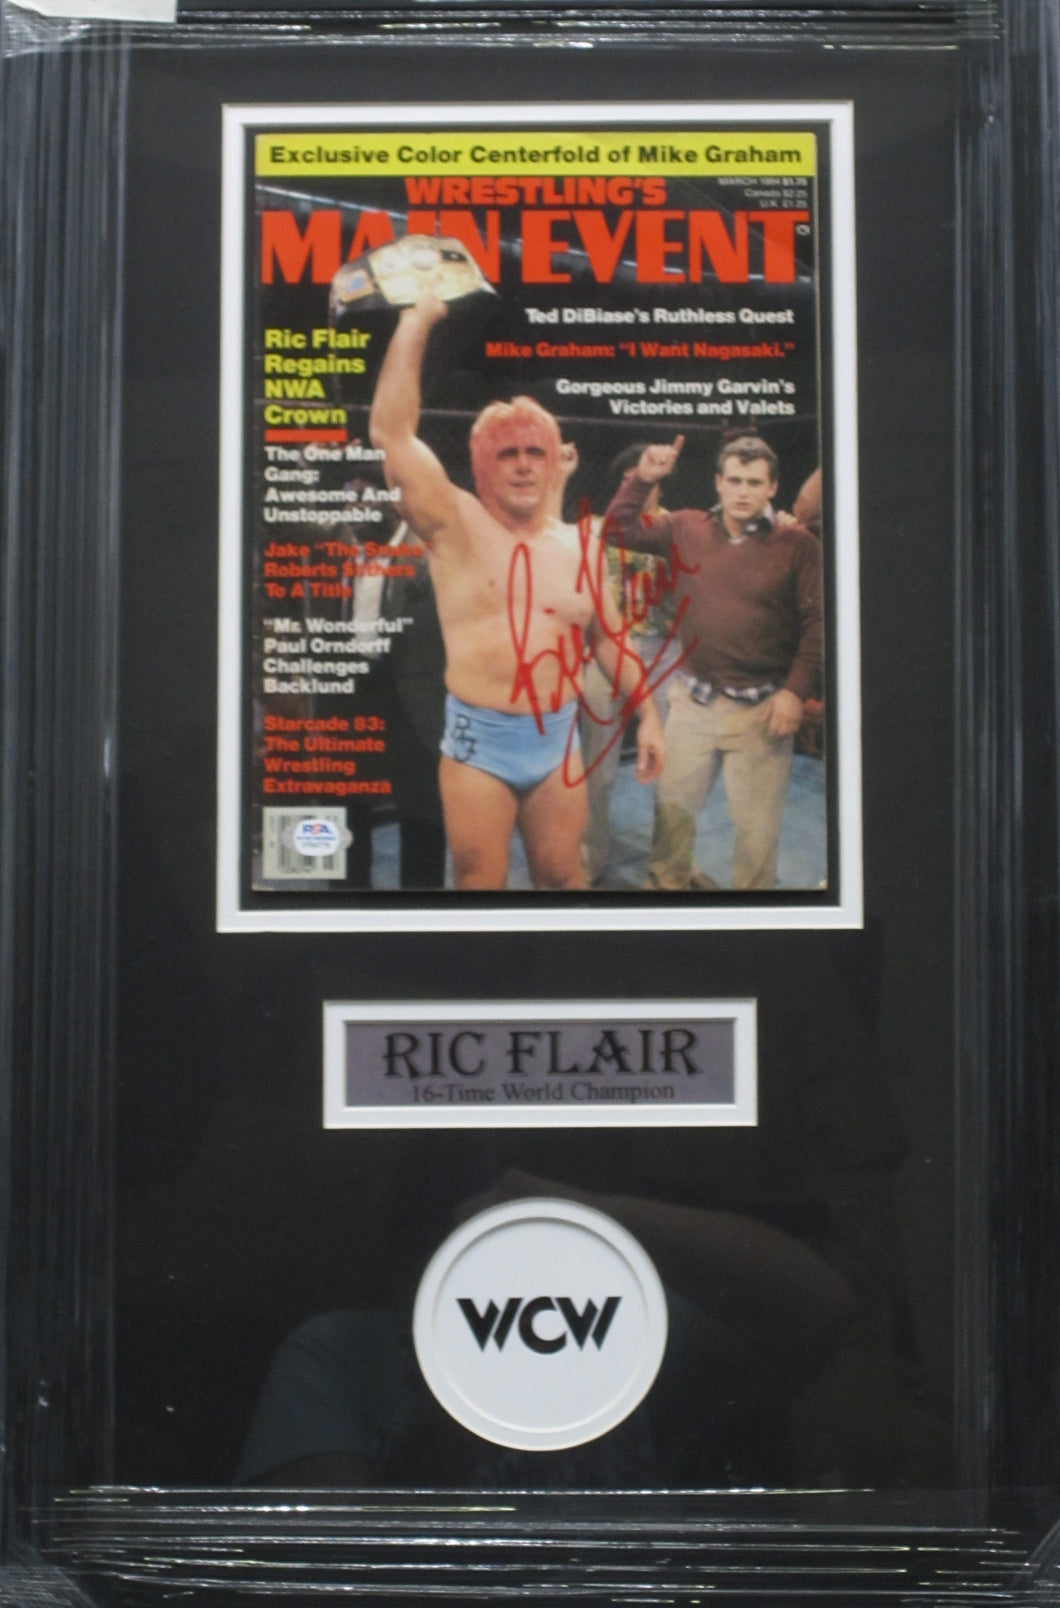 American Professional Wrestler Ric Flair Signed Wrestling's Main Event Magazine Framed & Matted with PSA COA